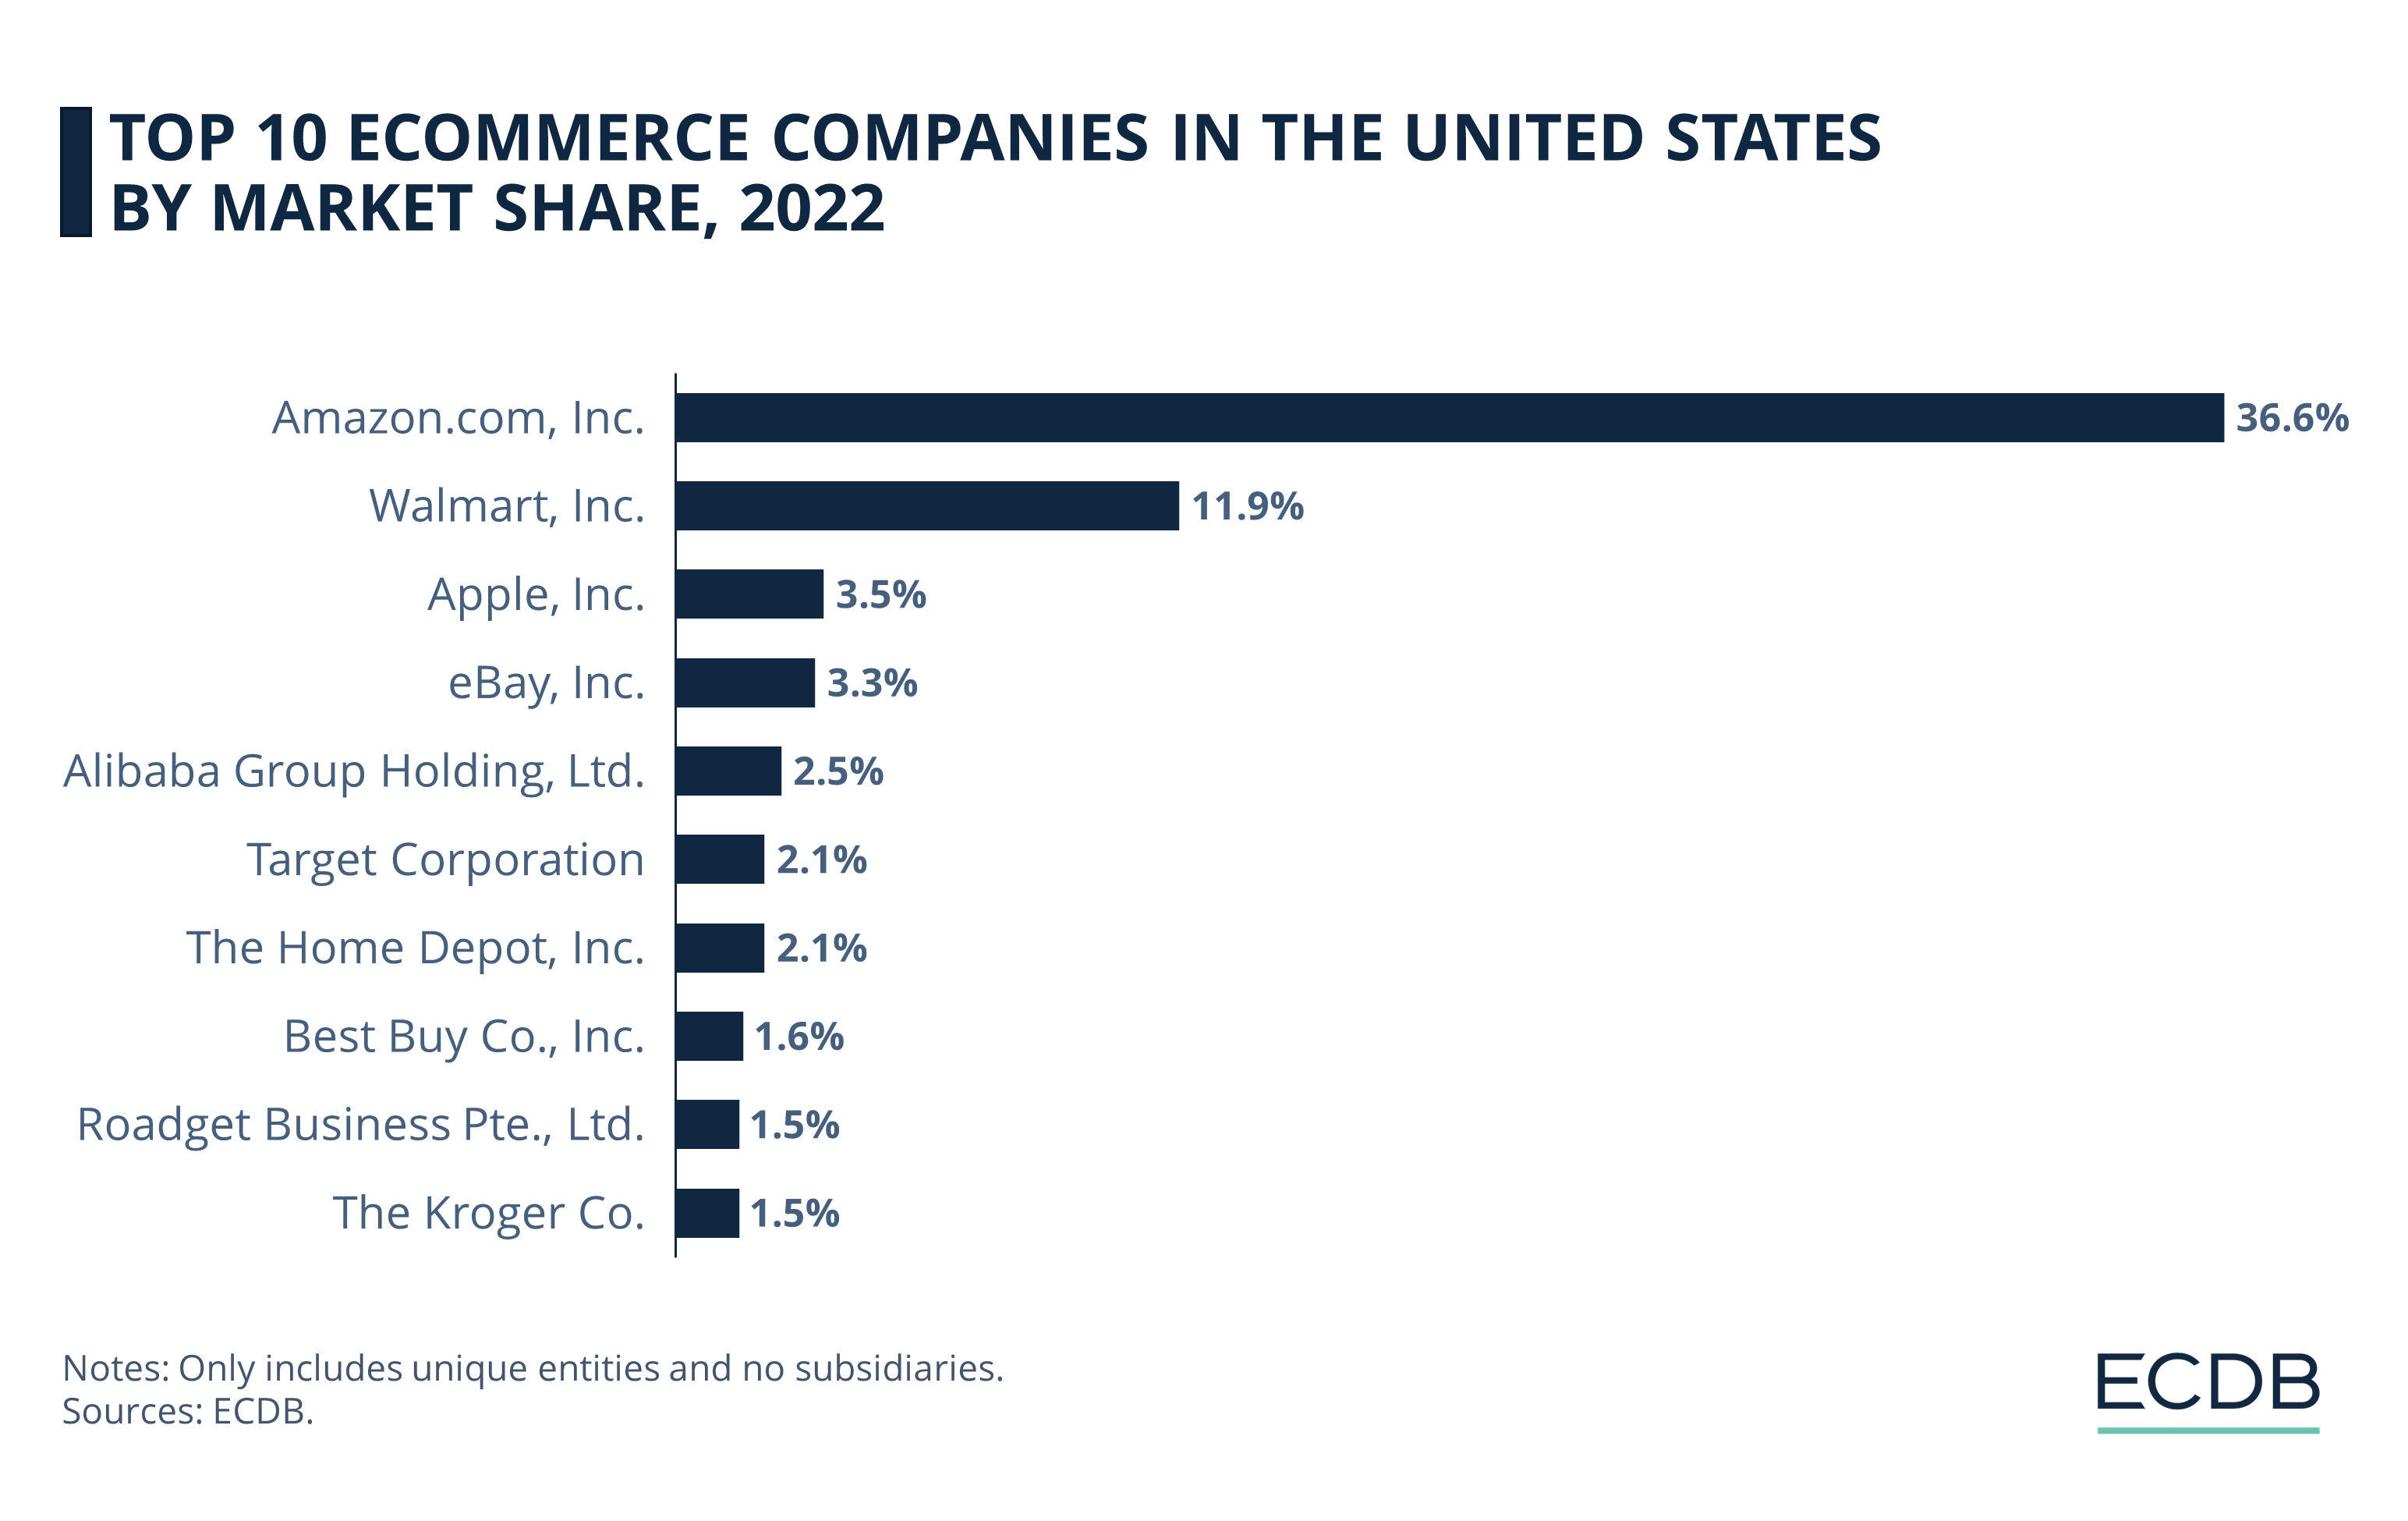 Top 10 eCommerce Companies in the United States by Market Share, 2022